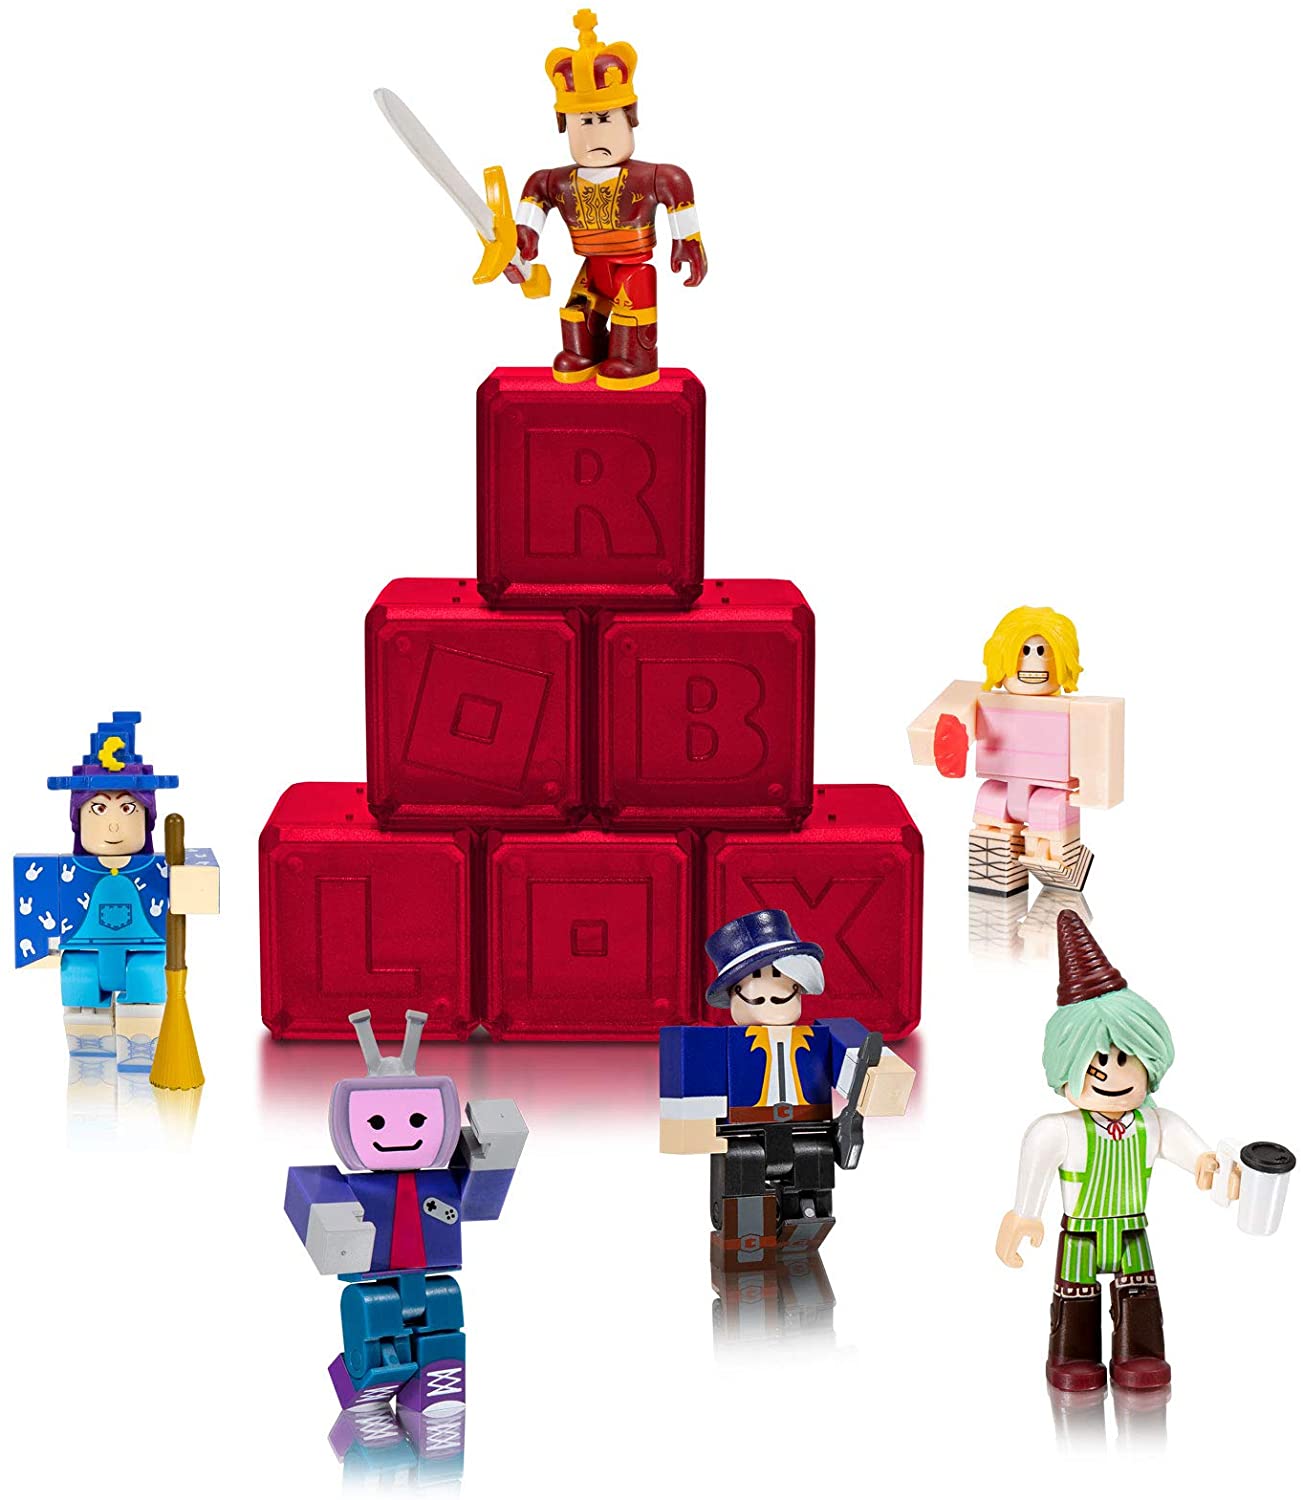 Roblox Celebrity Series 5 Mystery Box Toys Sky Toy Box - roblox toy code red valk